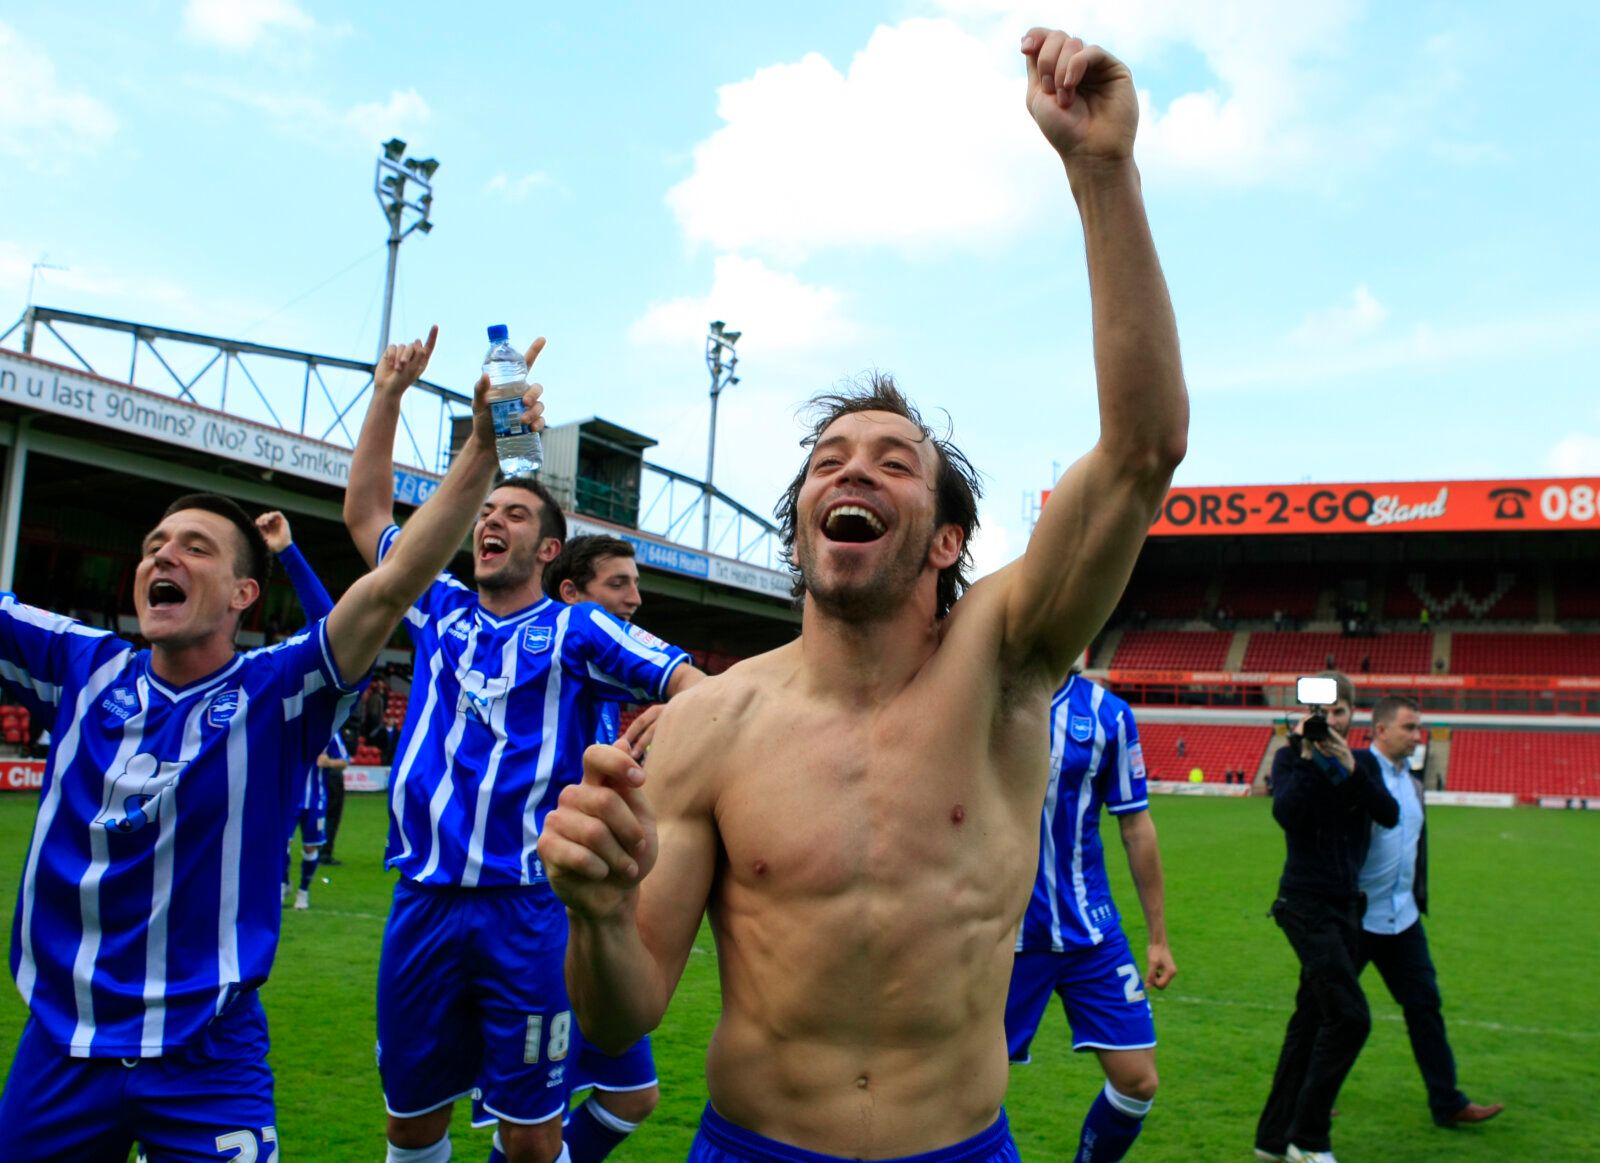 Football - Walsall v Brighton &amp; Hove Albion - npower Football League One - The Banks's Stadium - 10/11 - 16/4/11 
Inigo Calderon - Brighton &amp; Hove Albion celebrates promotion at full time 
Mandatory Credit: Action Images / Ian Smith